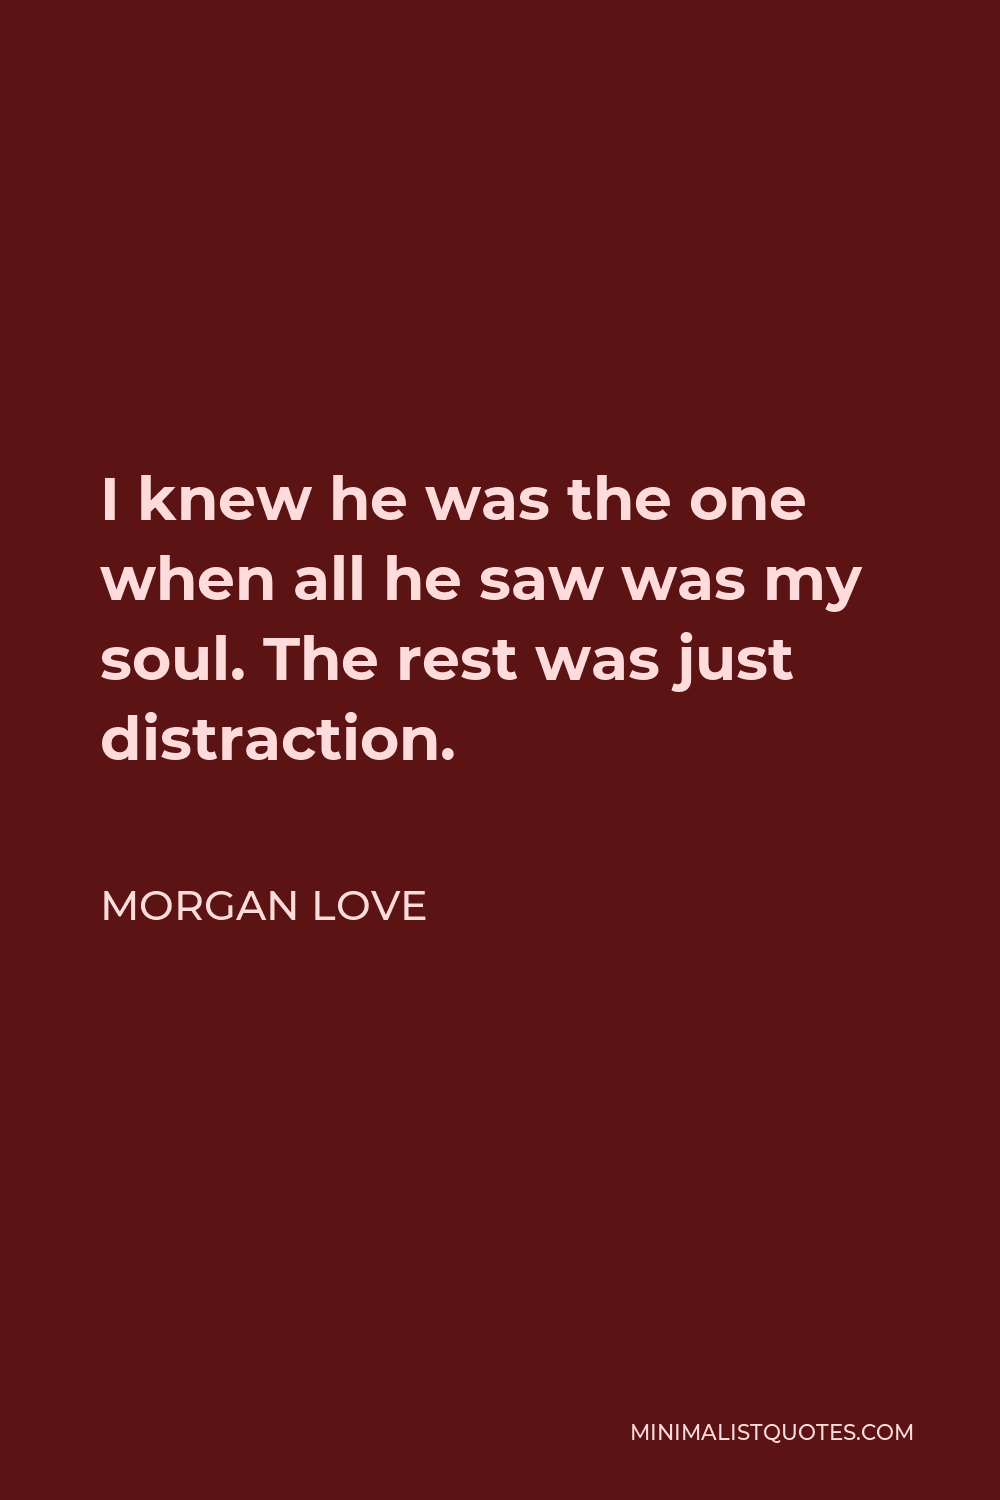 Morgan Love Quote - I knew he was the one when all he saw was my soul. The rest was just distraction.